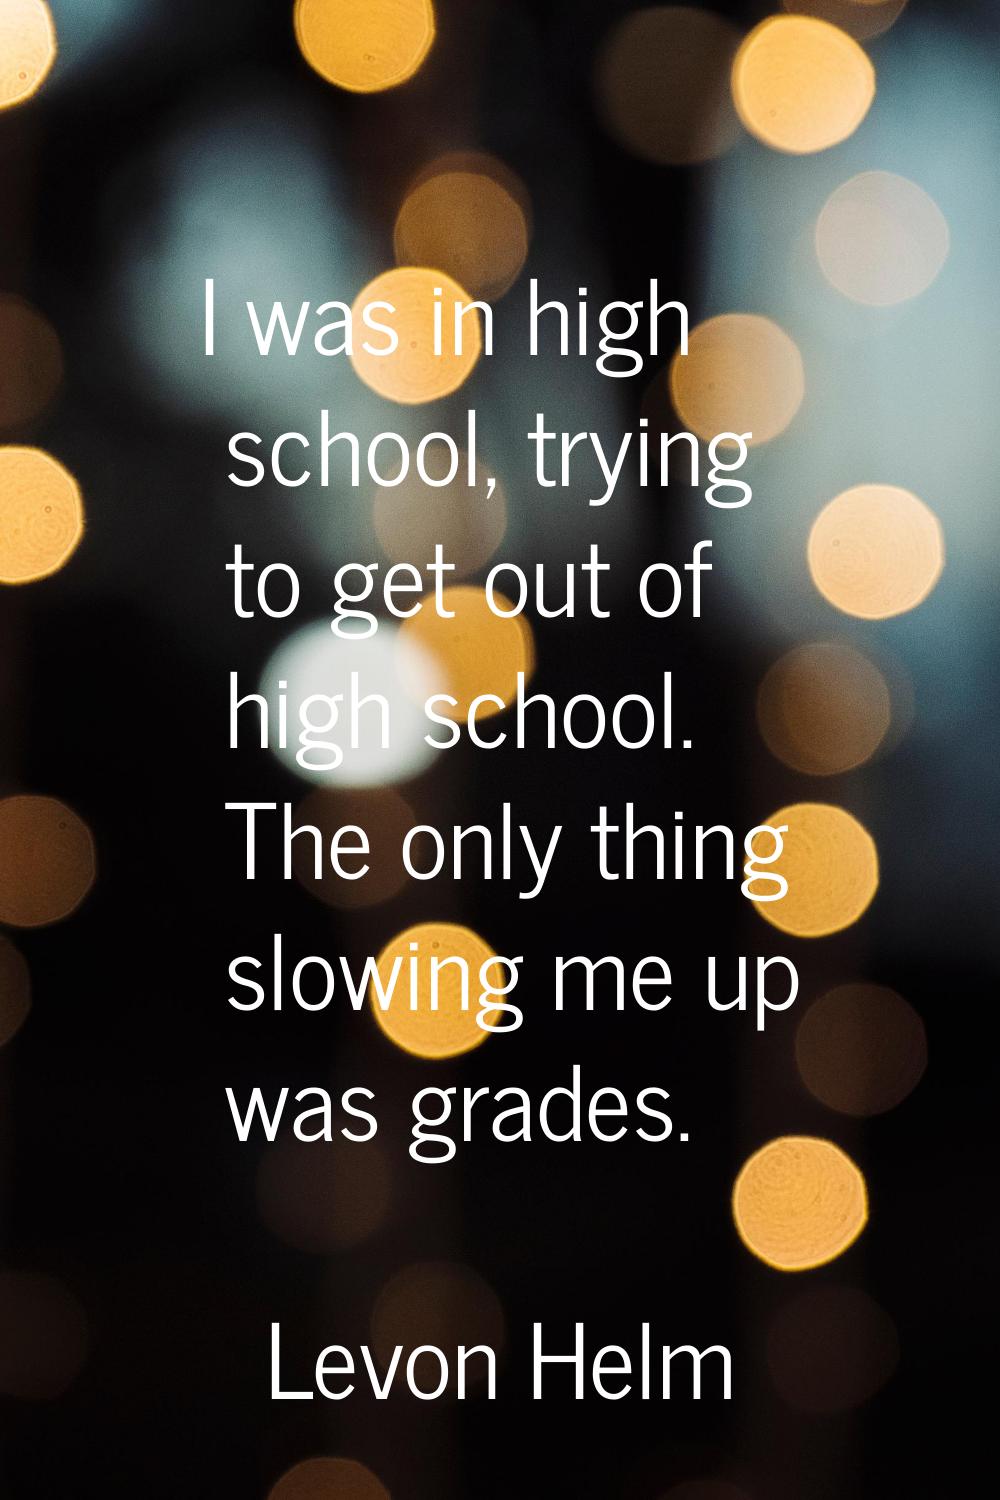 I was in high school, trying to get out of high school. The only thing slowing me up was grades.